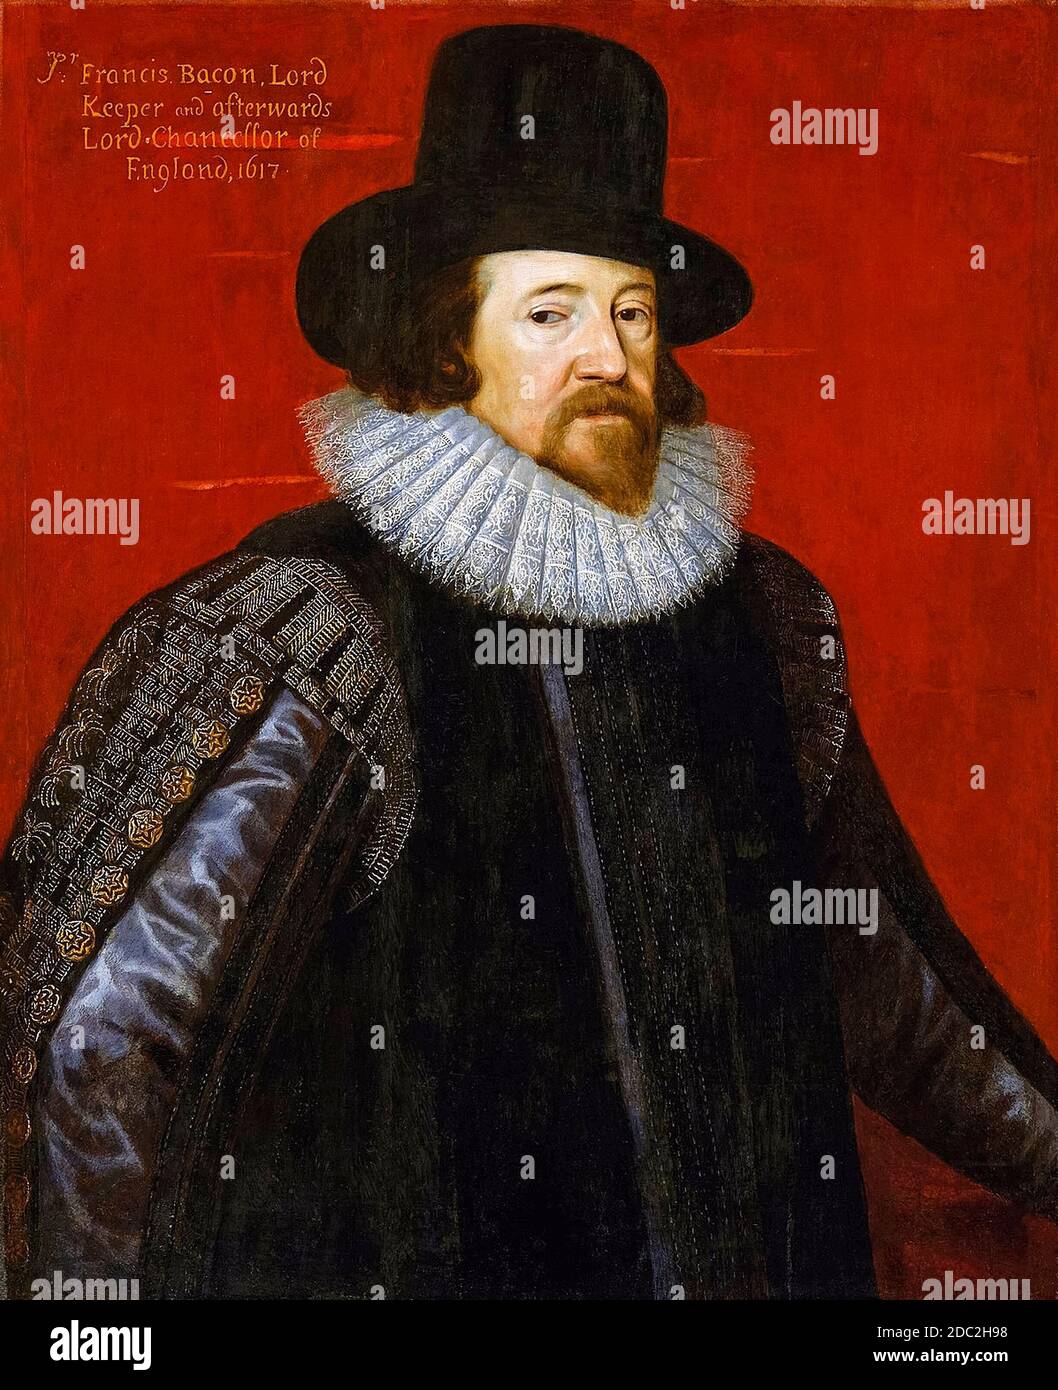 Sir Francis Bacon, 1st Viscount St Alban (1561-1626), English, philosopher and statesman, portrait painting by Paul van Somer I, 1617 Stock Photo